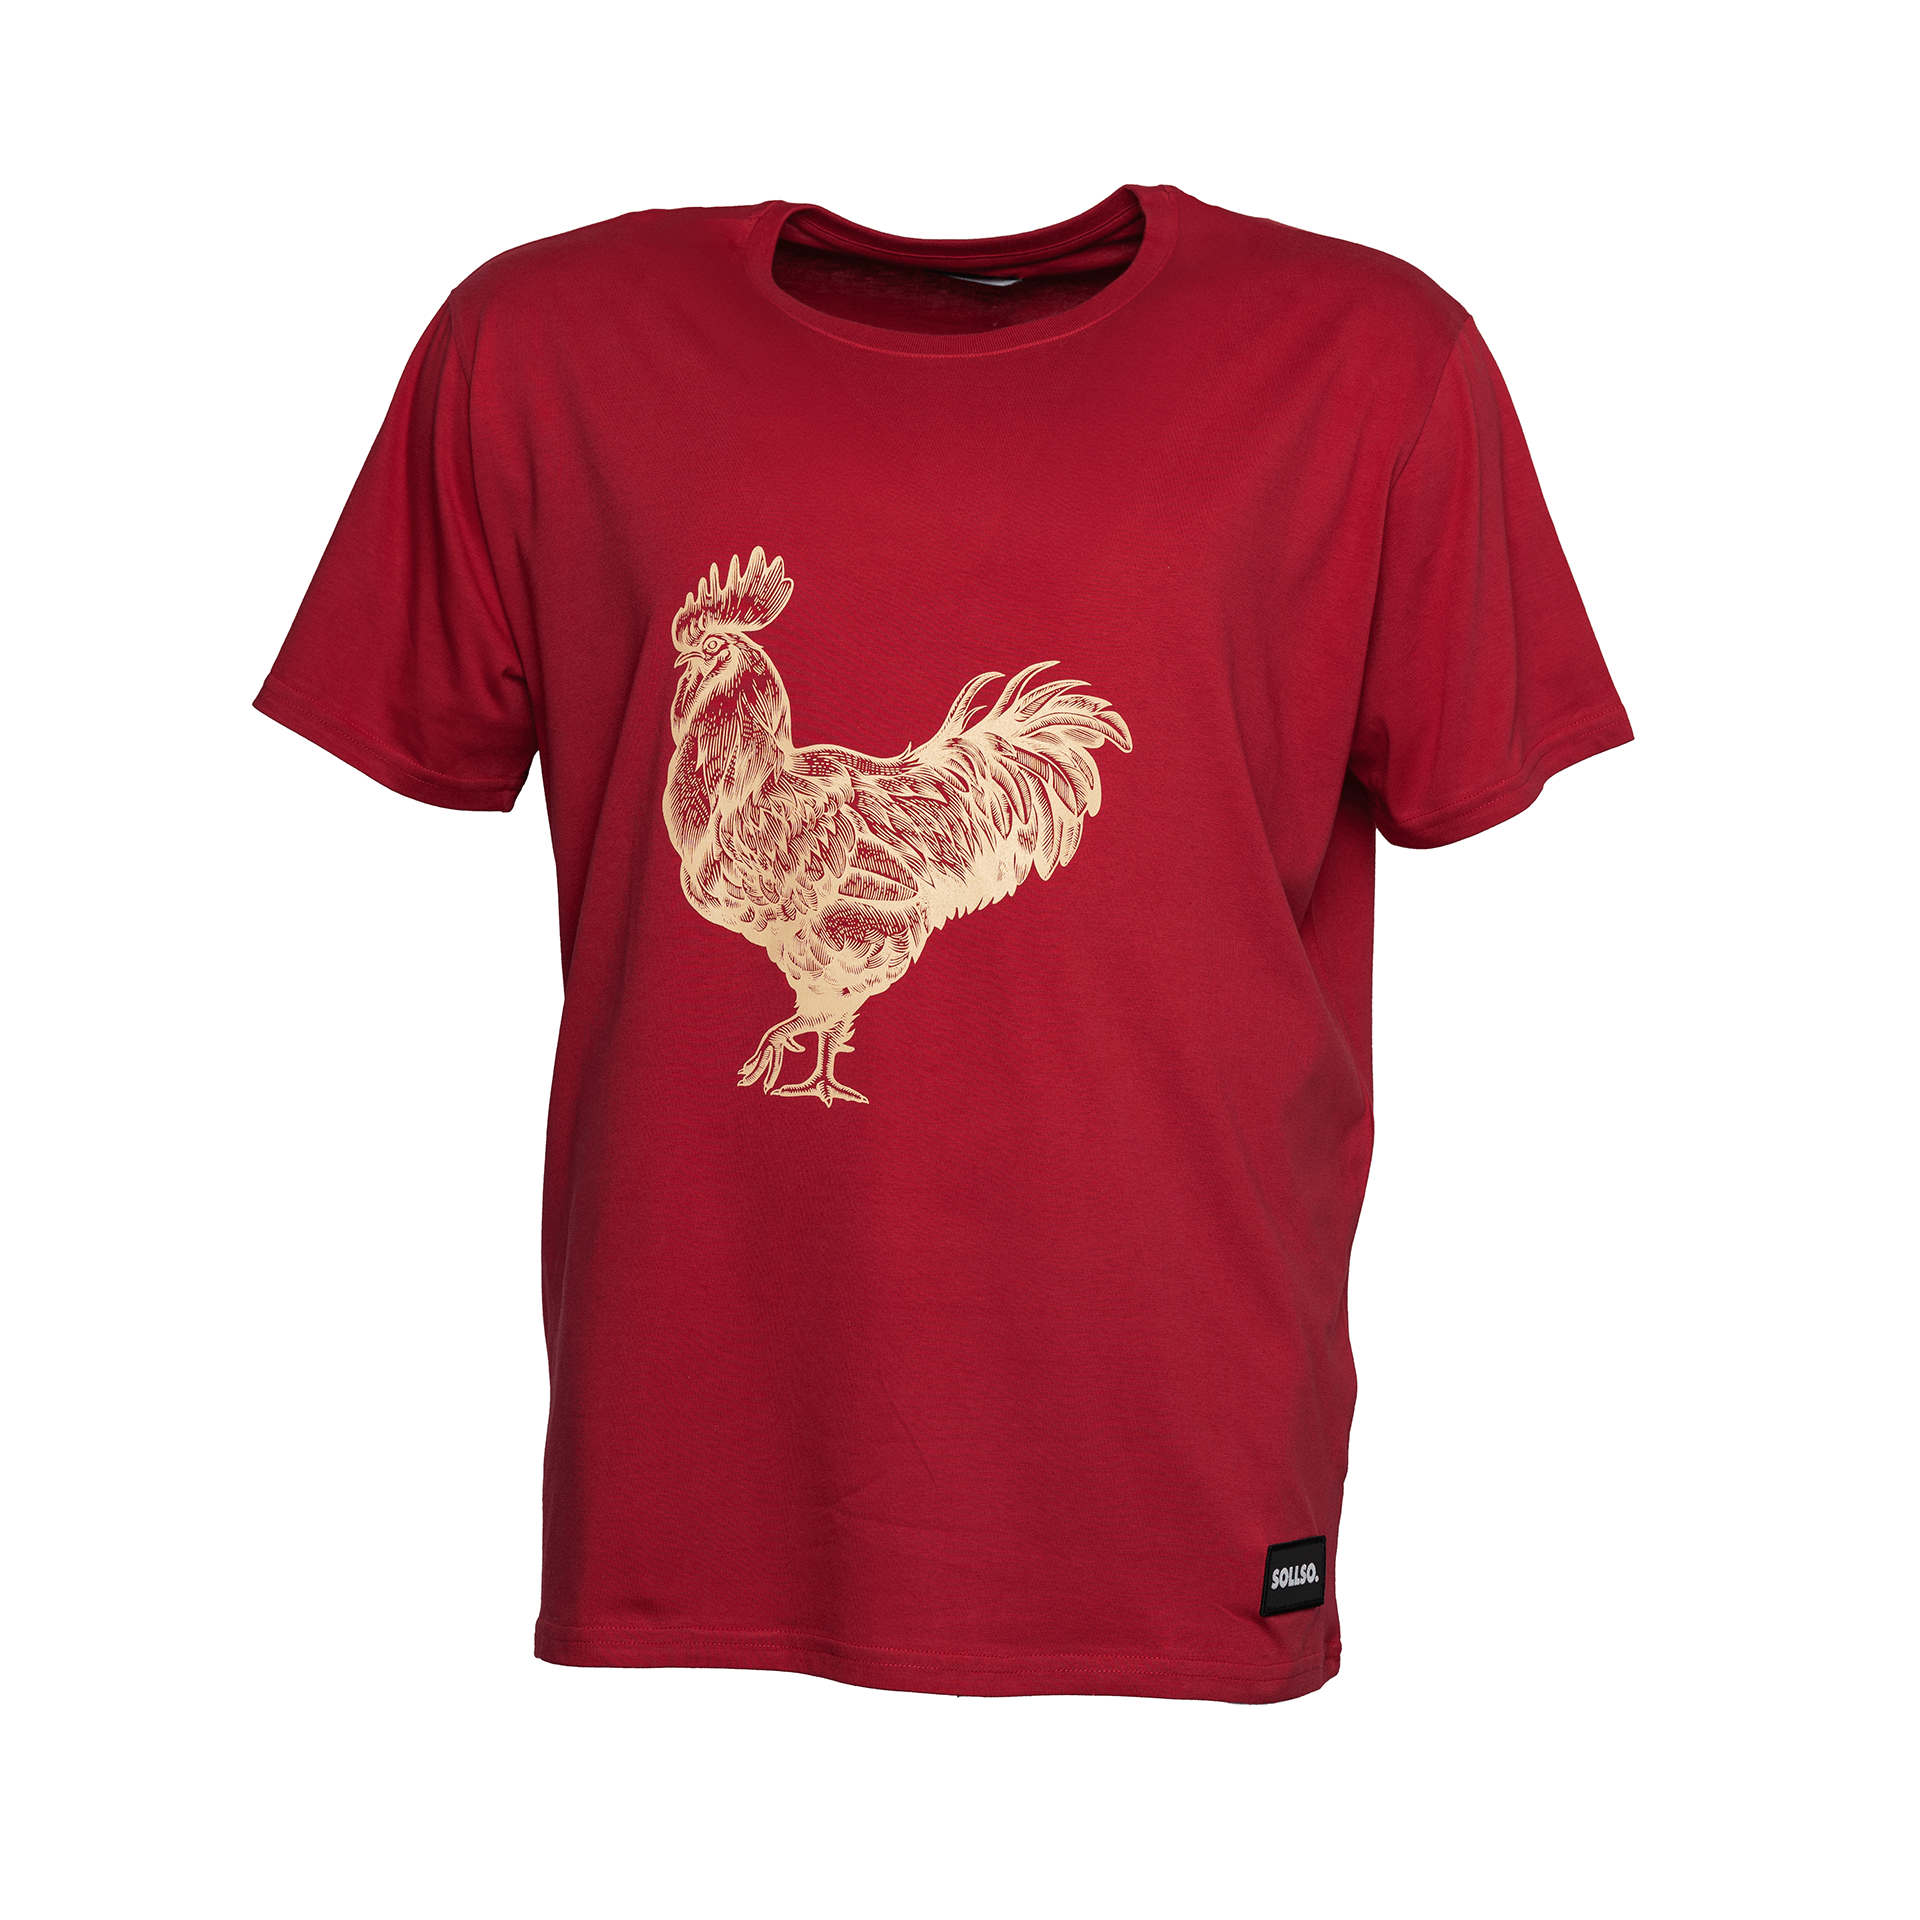 SOLLSO. T-Shirt "Rooster", Farbe Ginger Red, Größe XL